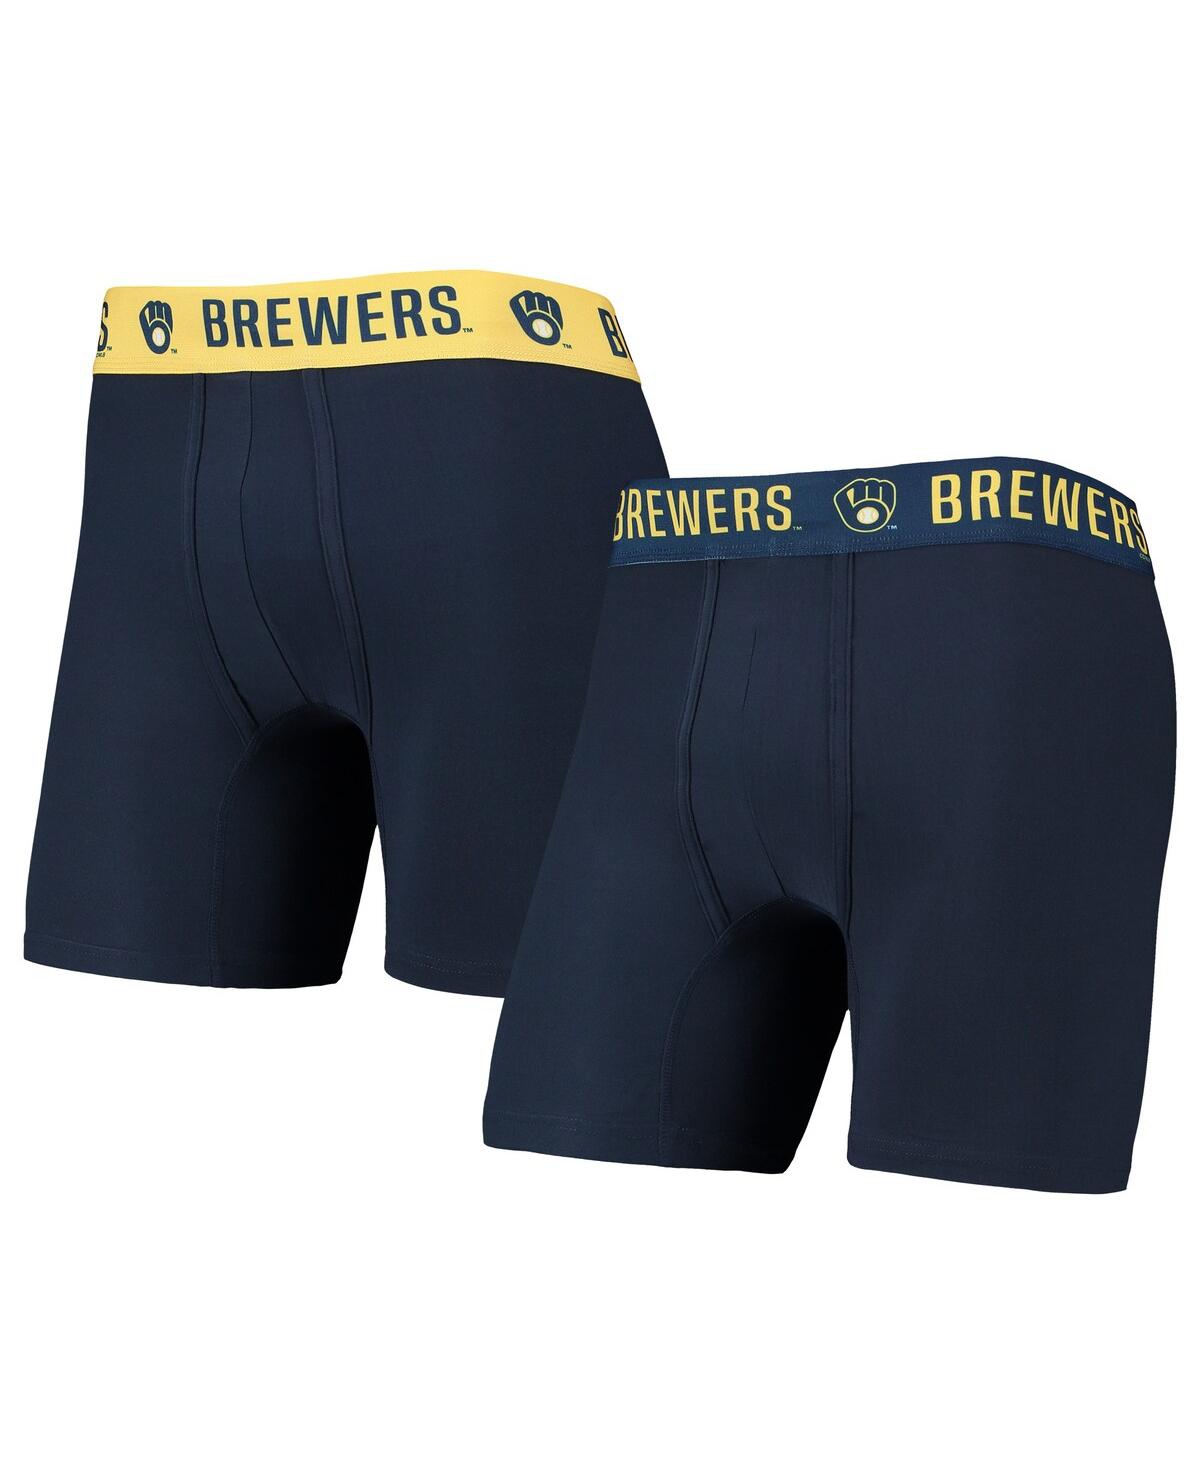 Men's Concepts Sport Navy, Gold Milwaukee Brewers Two-Pack Flagship Boxer Briefs Set - Navy, Gold